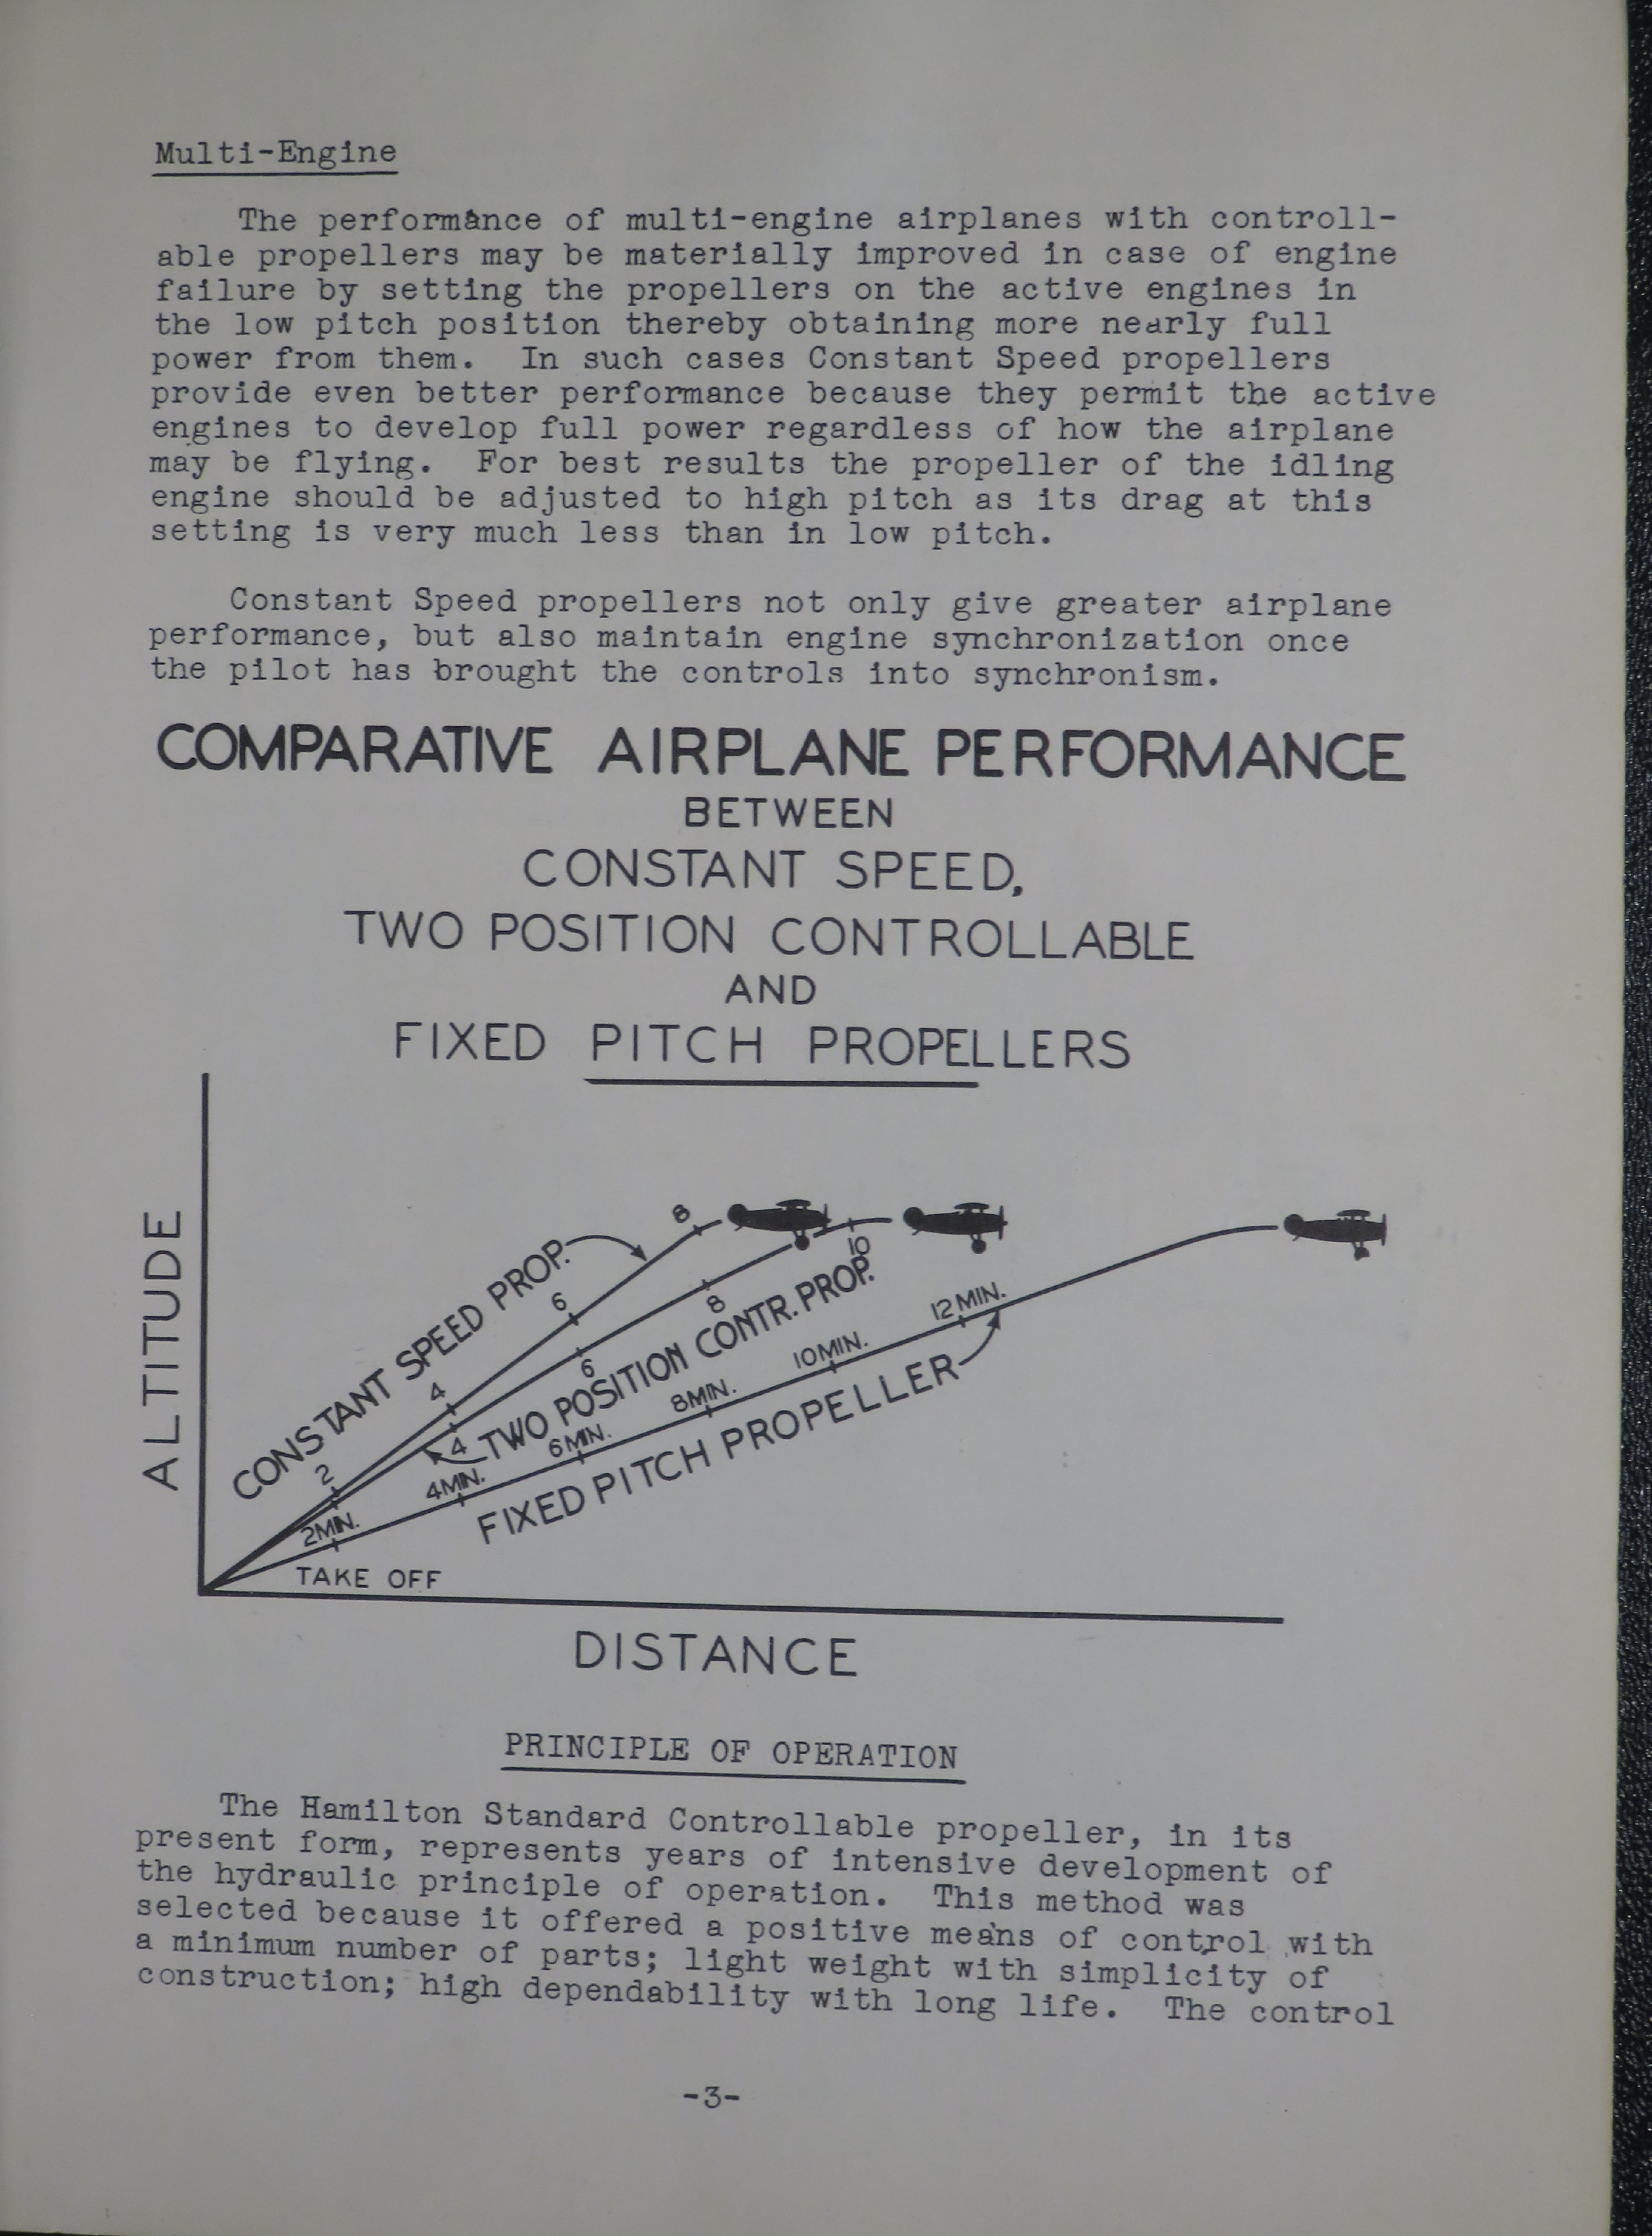 Sample page 9 from AirCorps Library document: Service, Operation and Maintenance Instructions for Controllable and Constant Speed Propellers